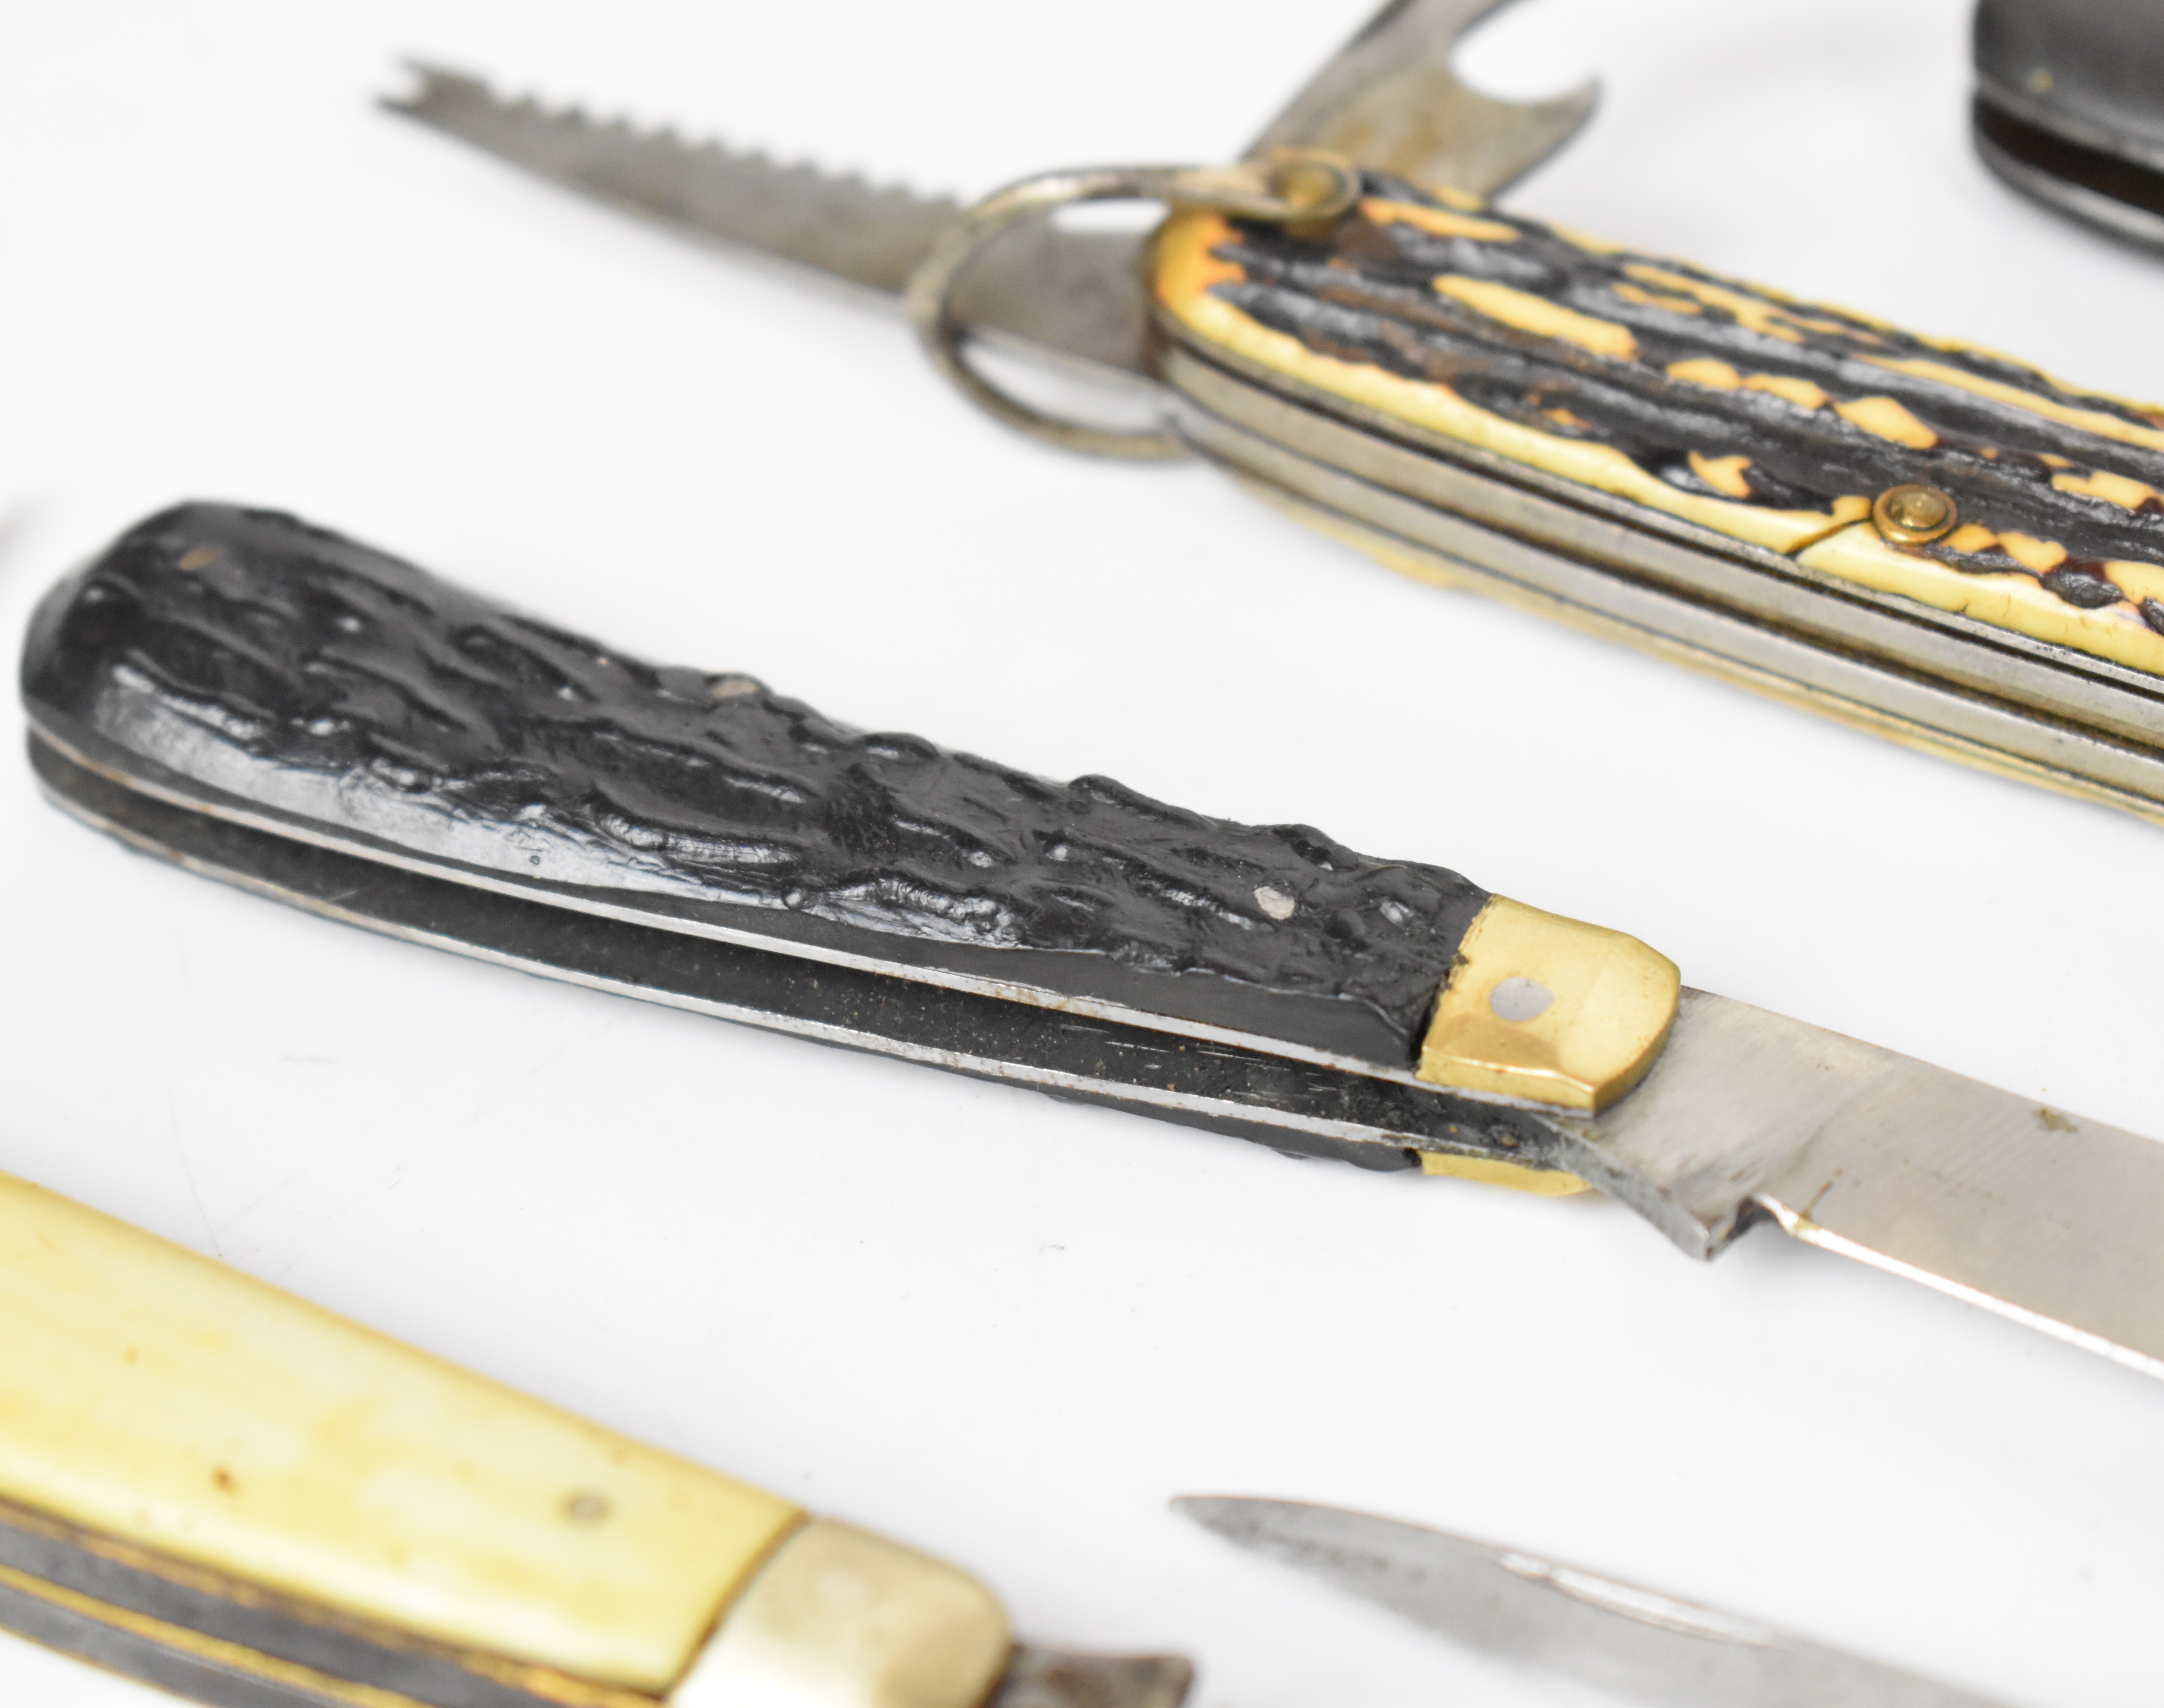 Seven pocket / folding knives including William Rogers, Richards, W Wilson & Sons and Rottgen, - Image 4 of 7